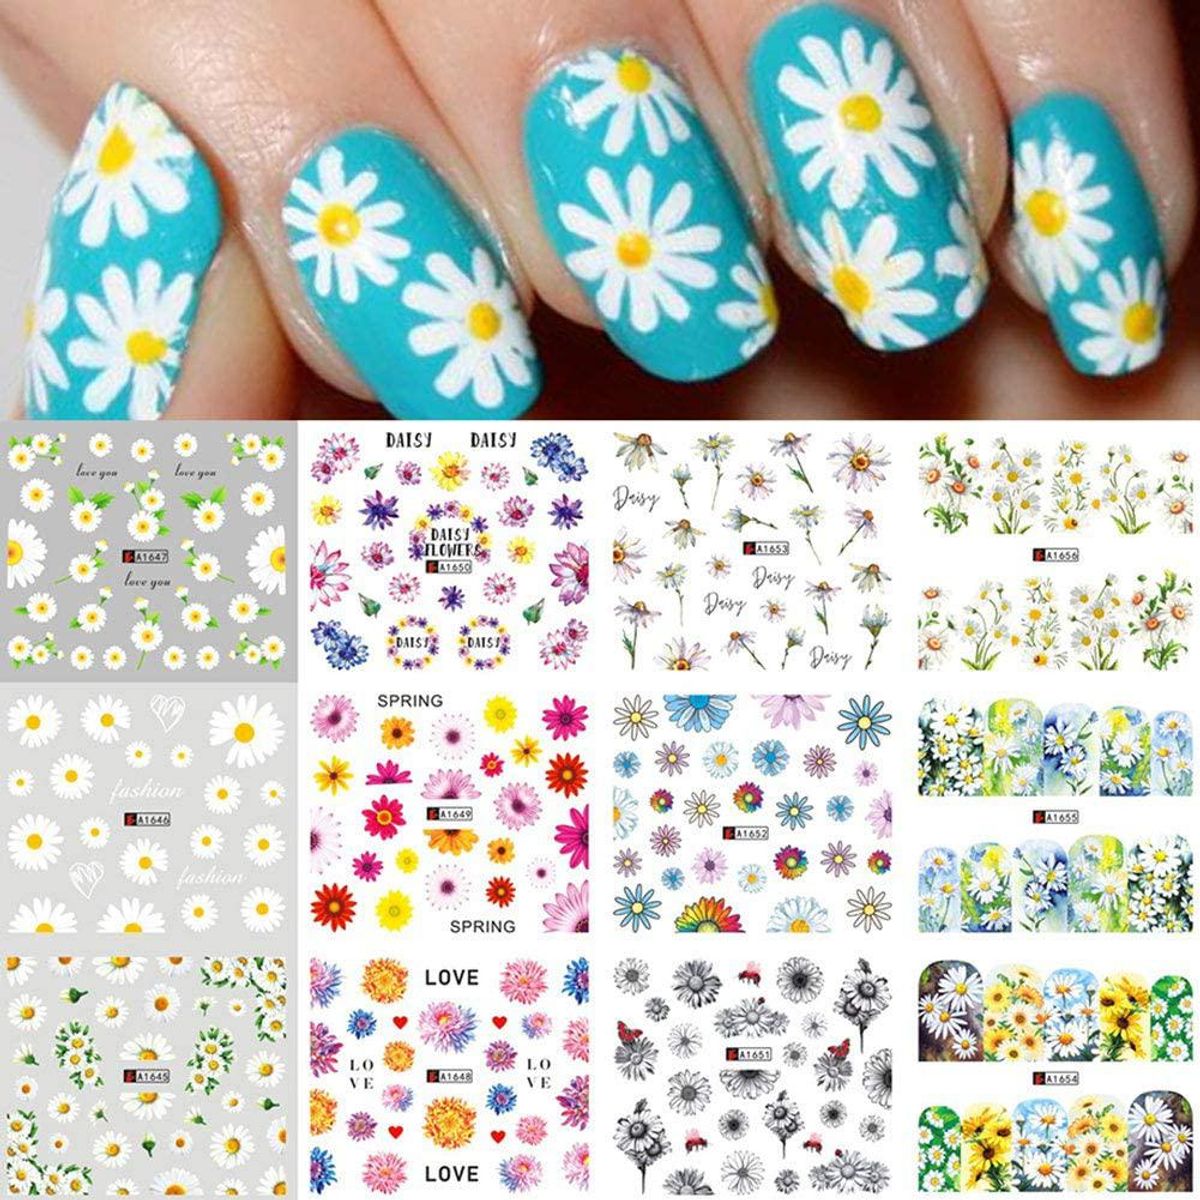 fexo daisy nail art stickers decals